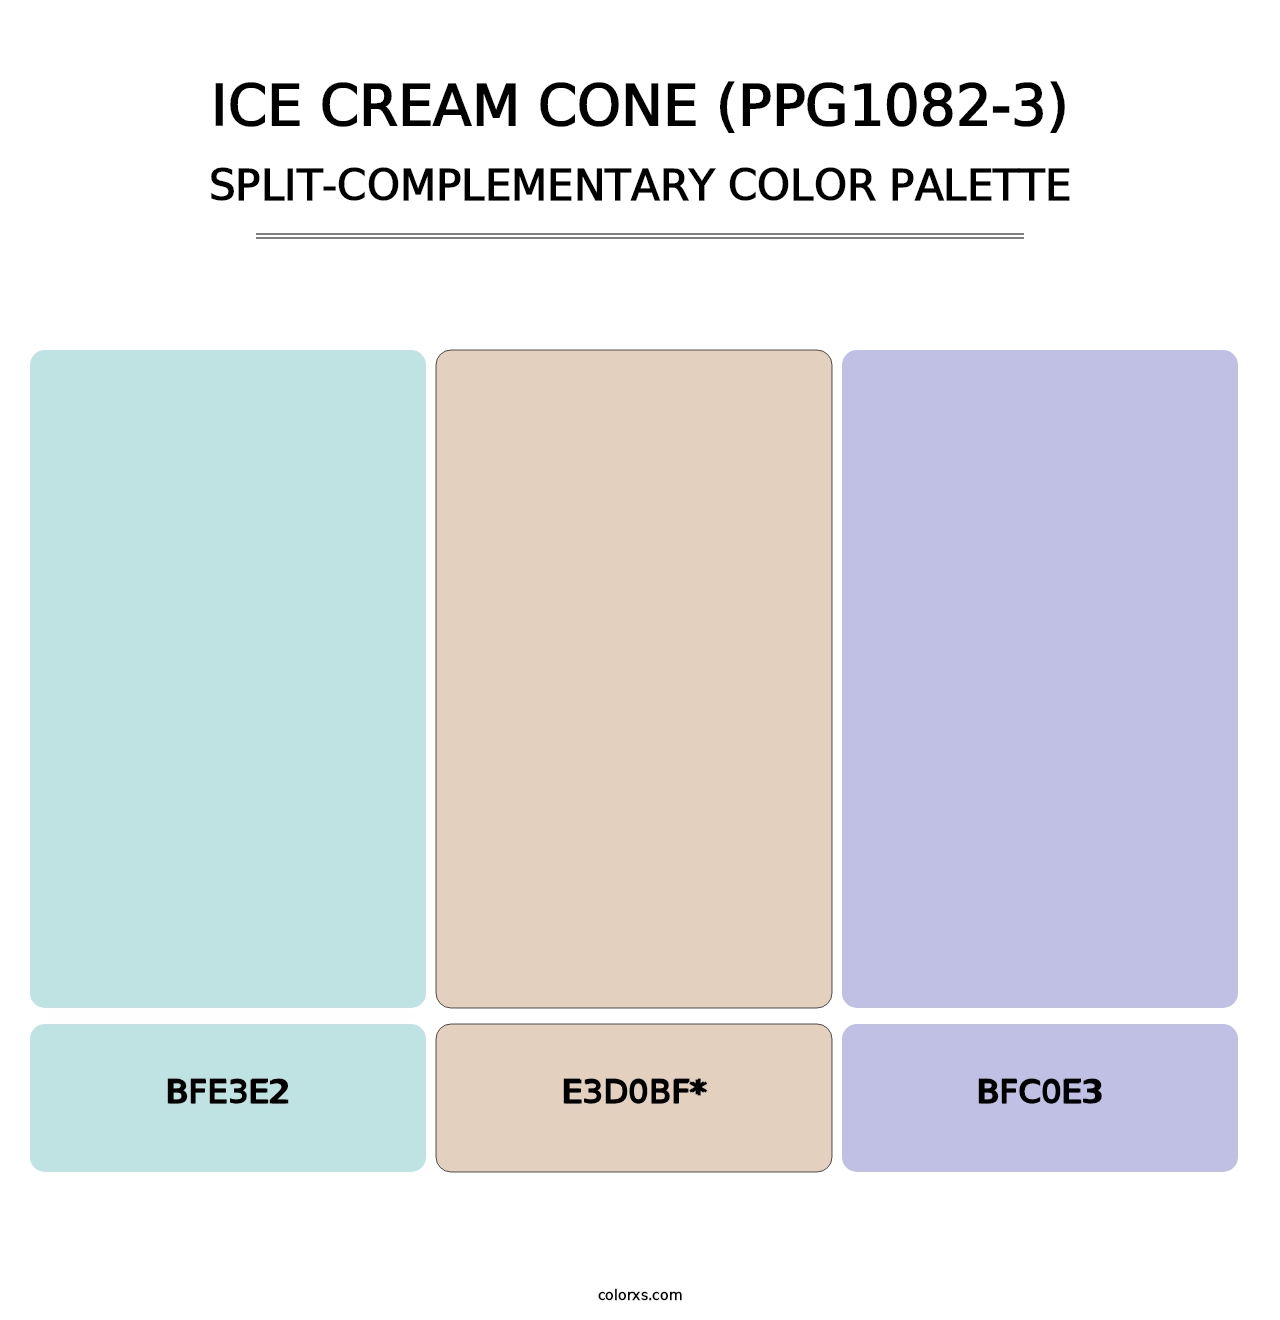 Ice Cream Cone (PPG1082-3) - Split-Complementary Color Palette